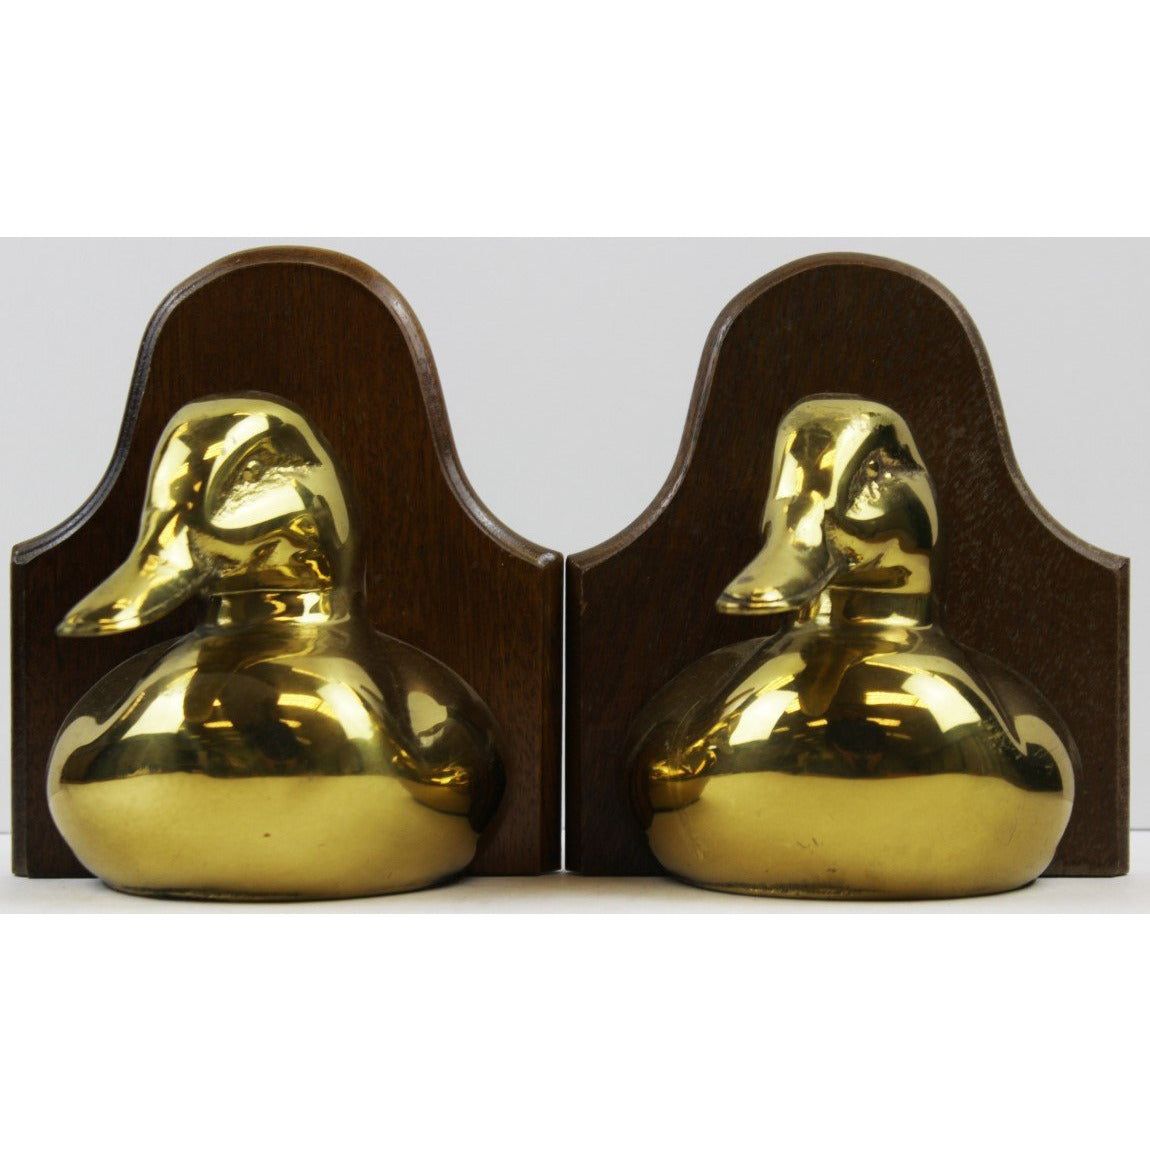 Pair of Tall Brass Duck Head Vintage Bookends - Ruby Lane